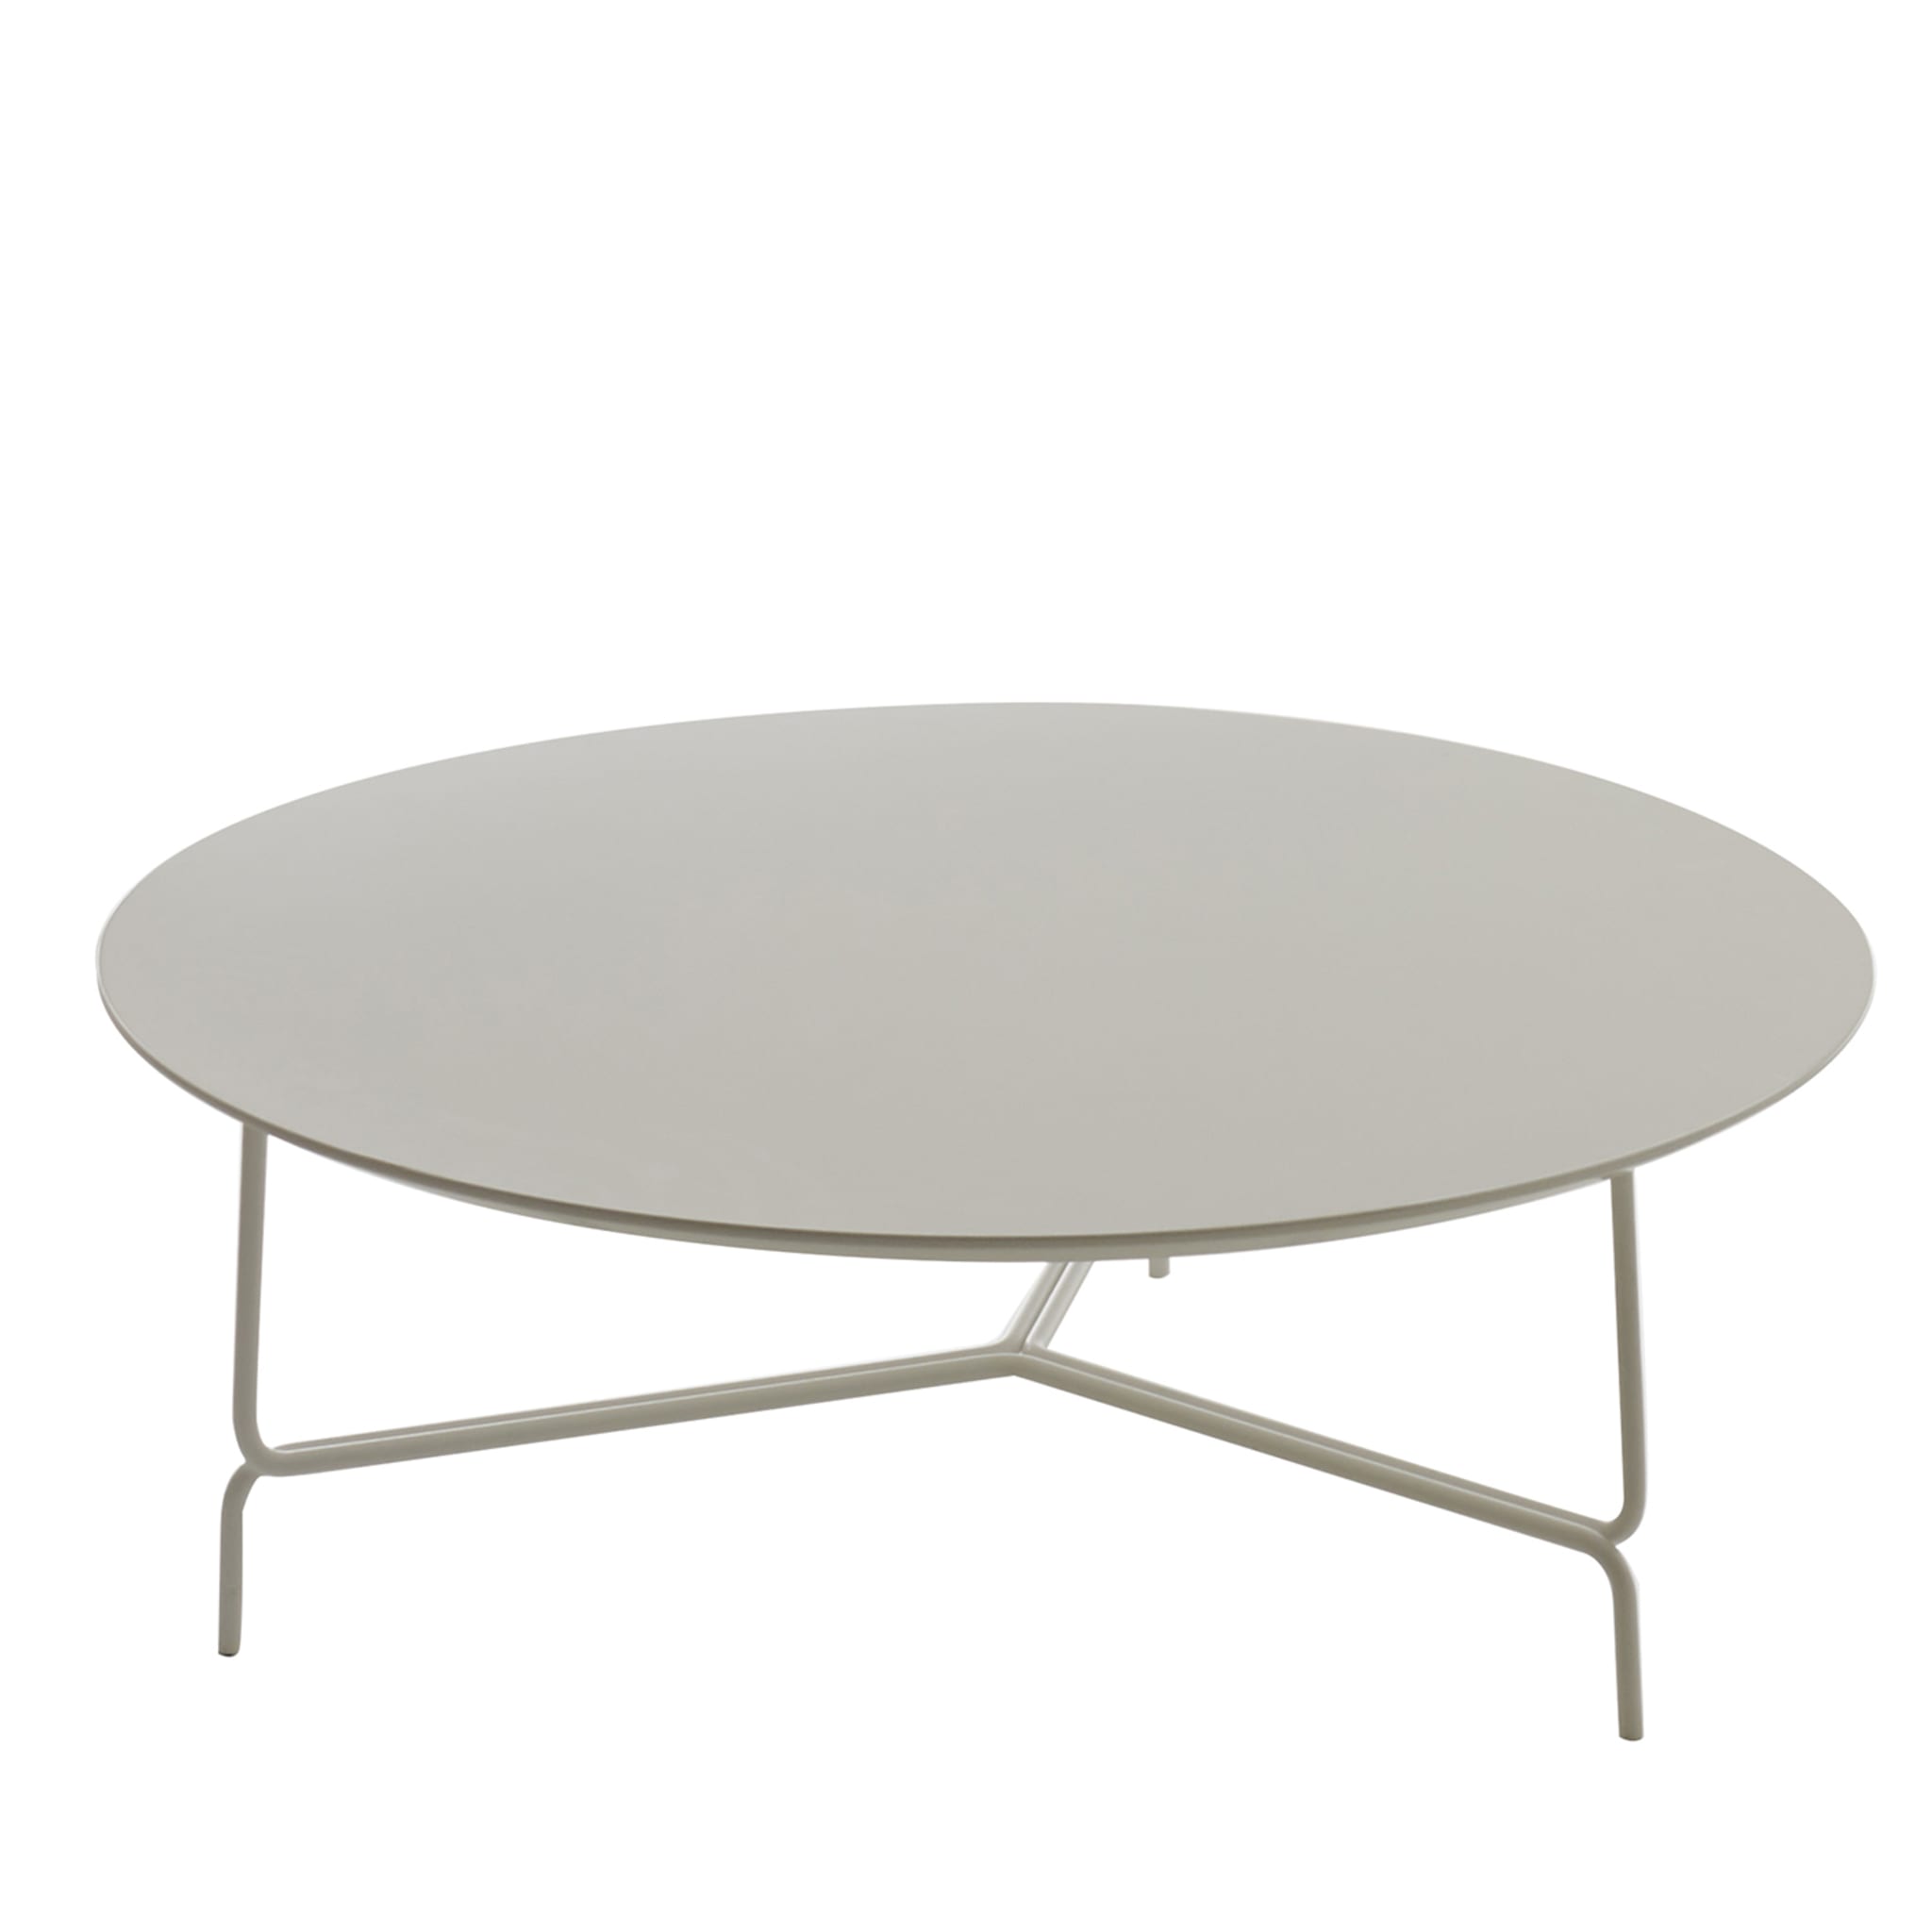 Litta White Coffee Table by R. Mangiarotti and I. Suppanen - Main view